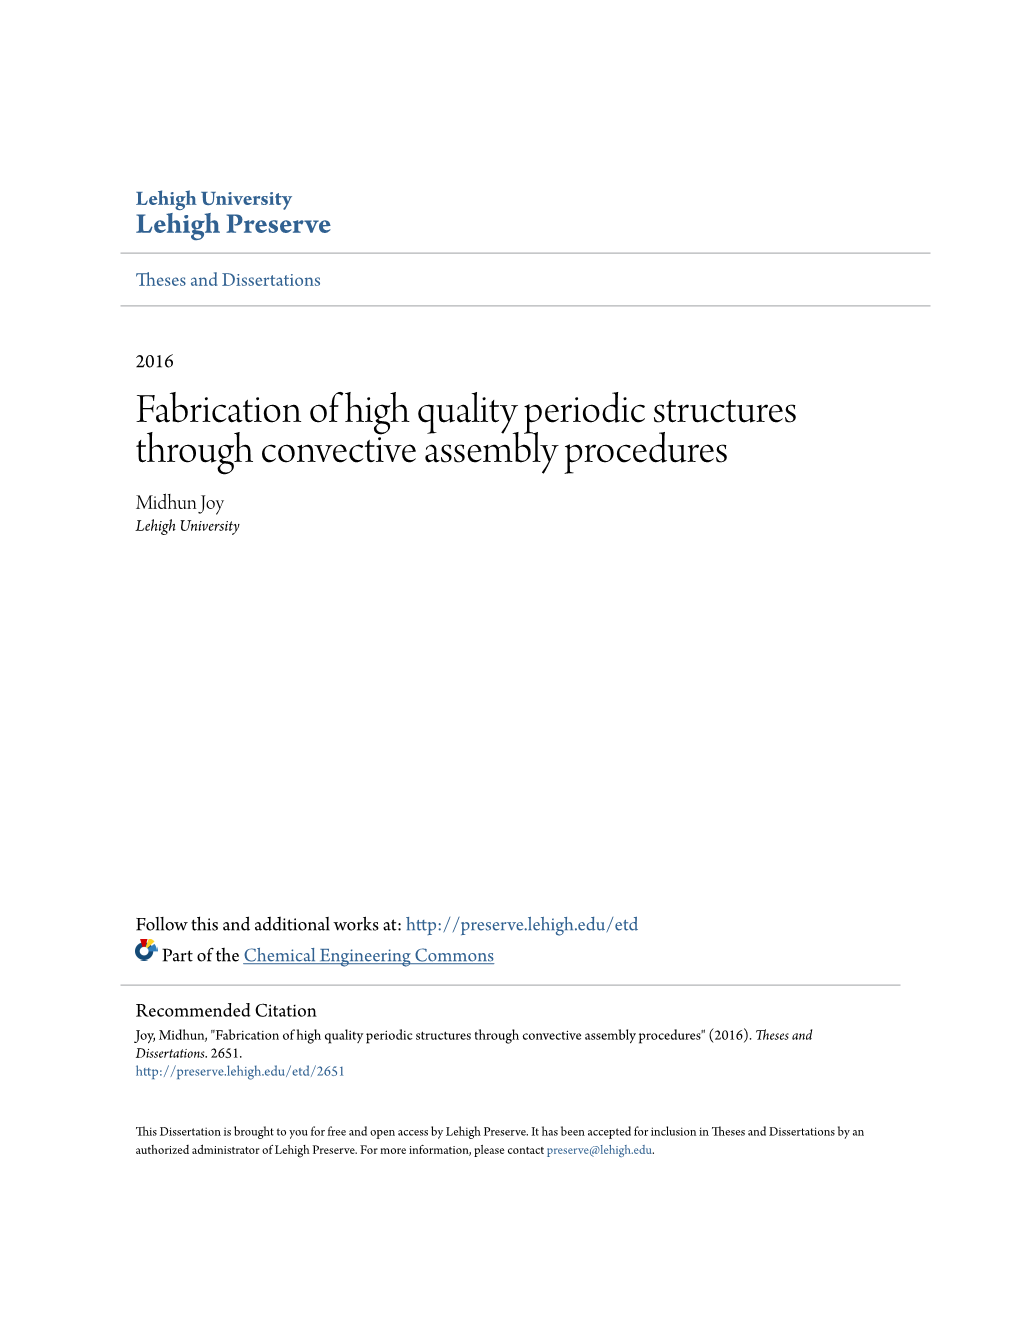 Fabrication of High Quality Periodic Structures Through Convective Assembly Procedures Midhun Joy Lehigh University